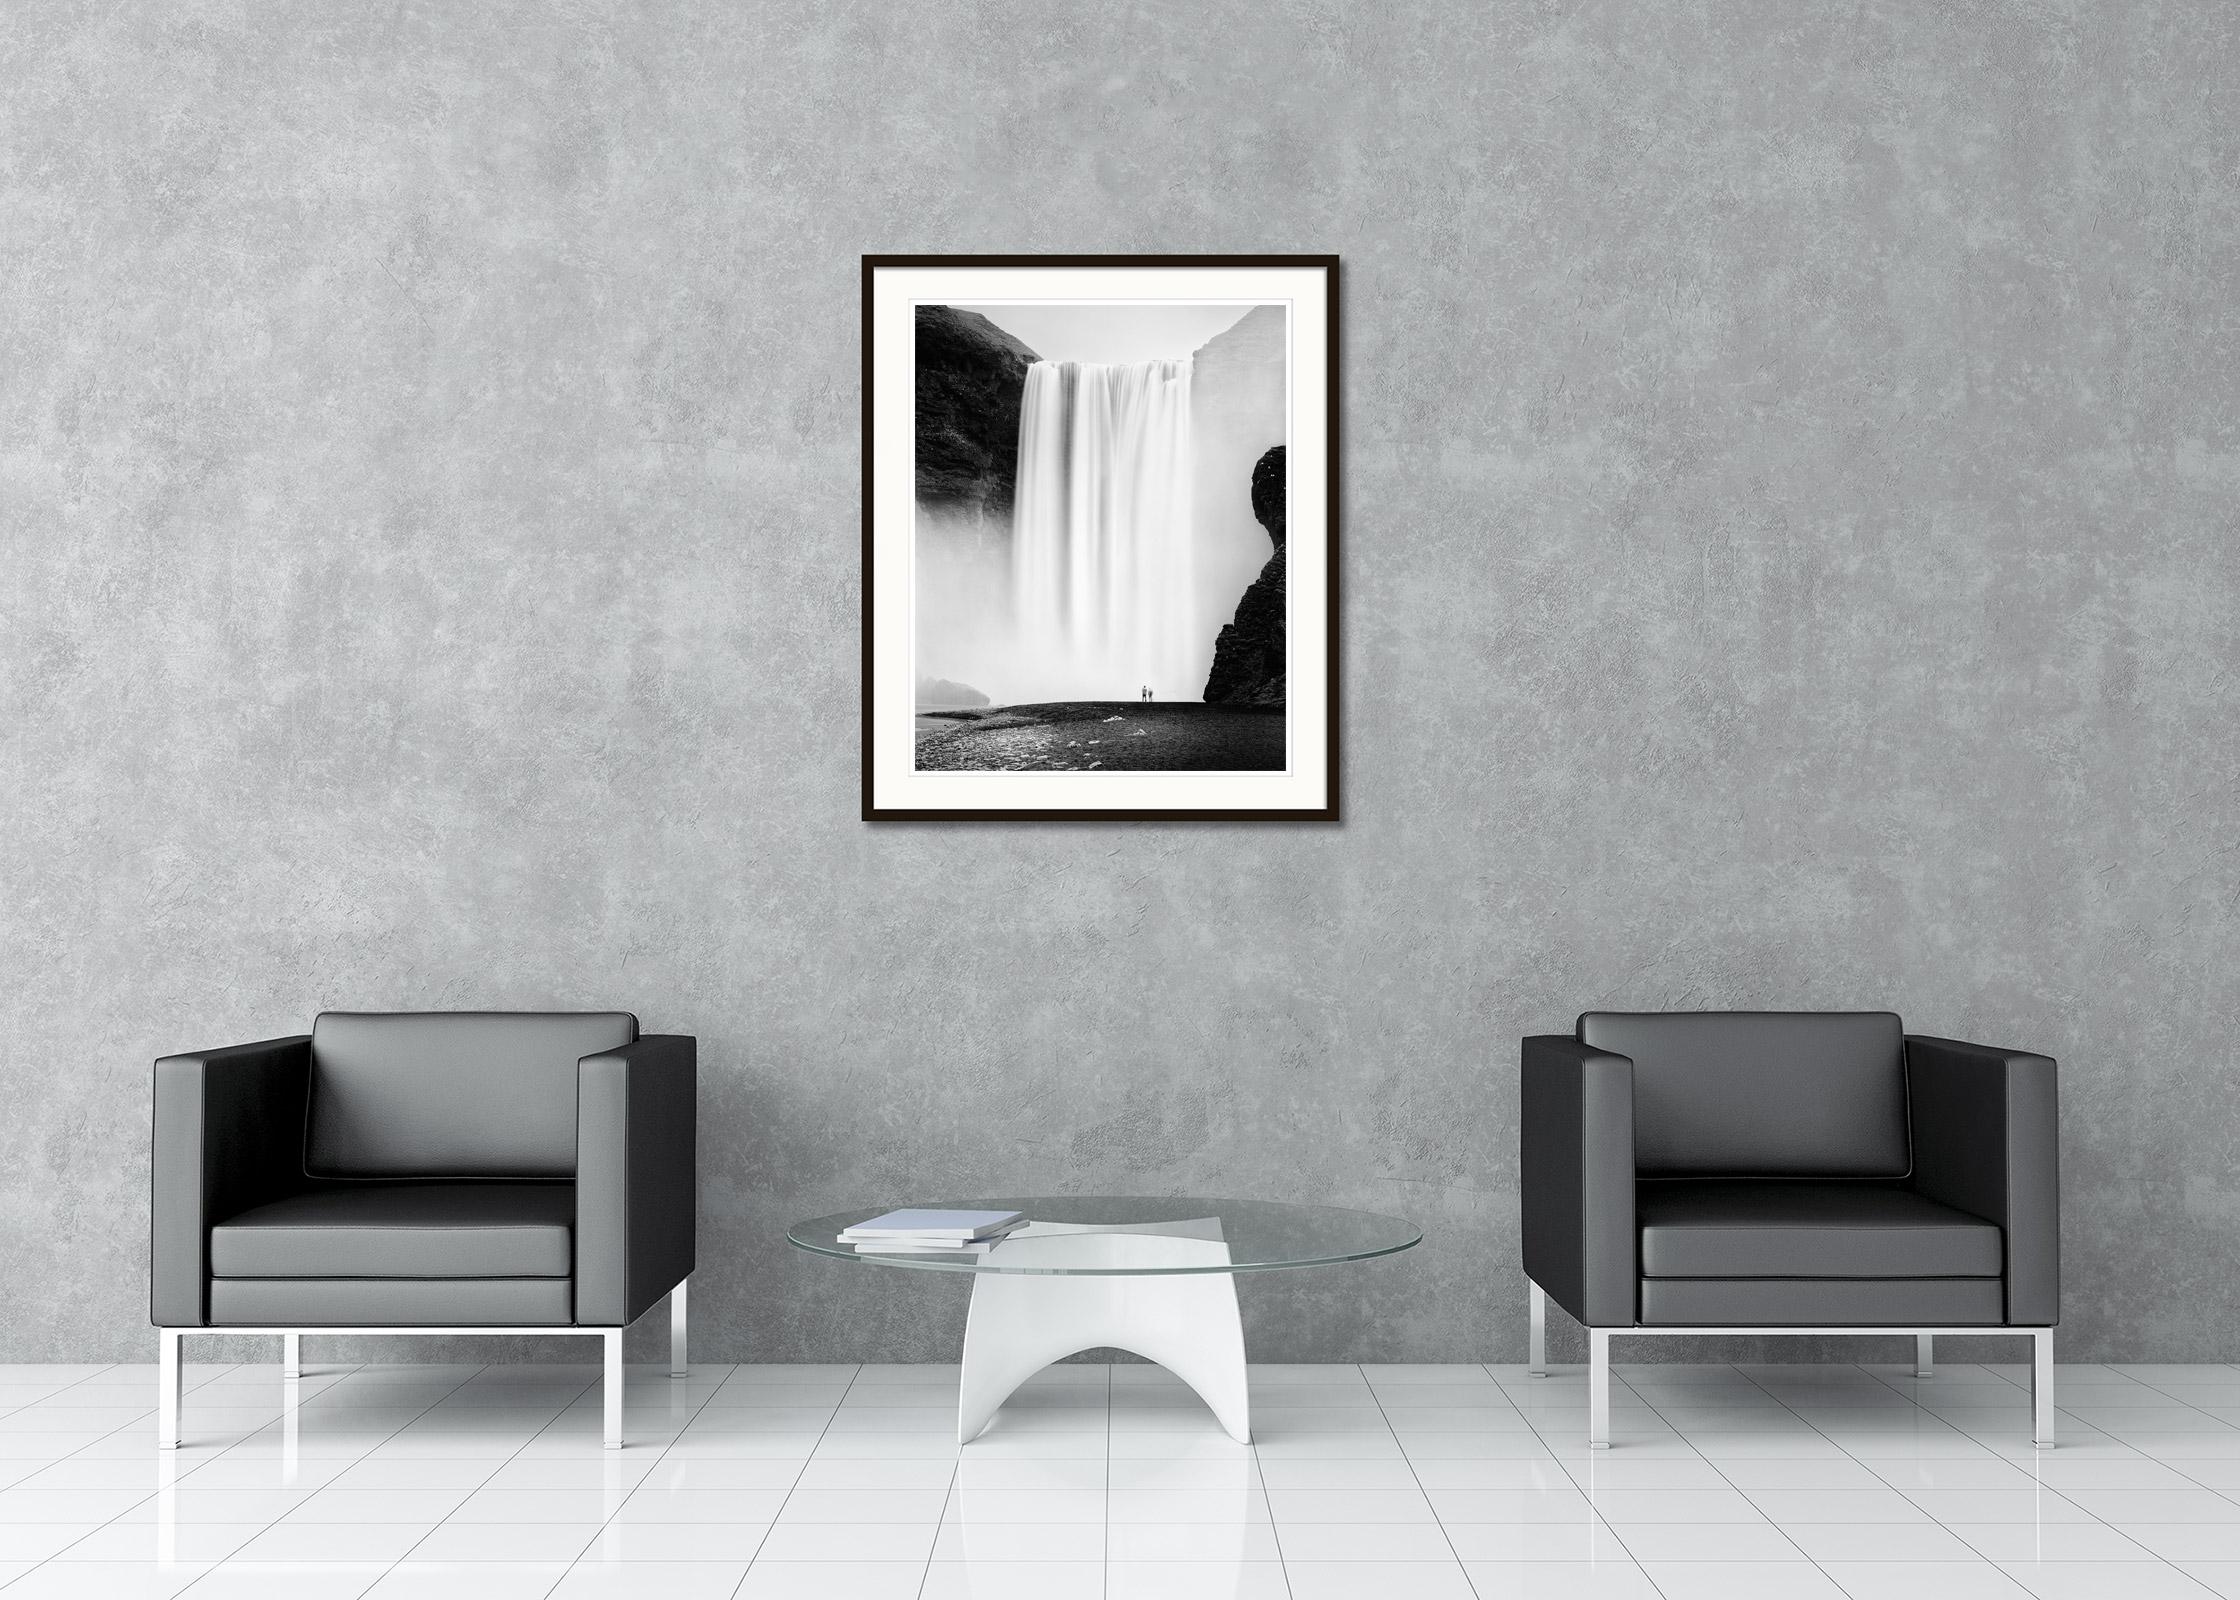 Black and White fine art long exposure waterscape - landscape photography. Skogafoss gigantic waterfall, Iceland. Archival pigment ink print, edition of 7. Signed, titled, dated and numbered by artist. Certificate of authenticity included. Printed